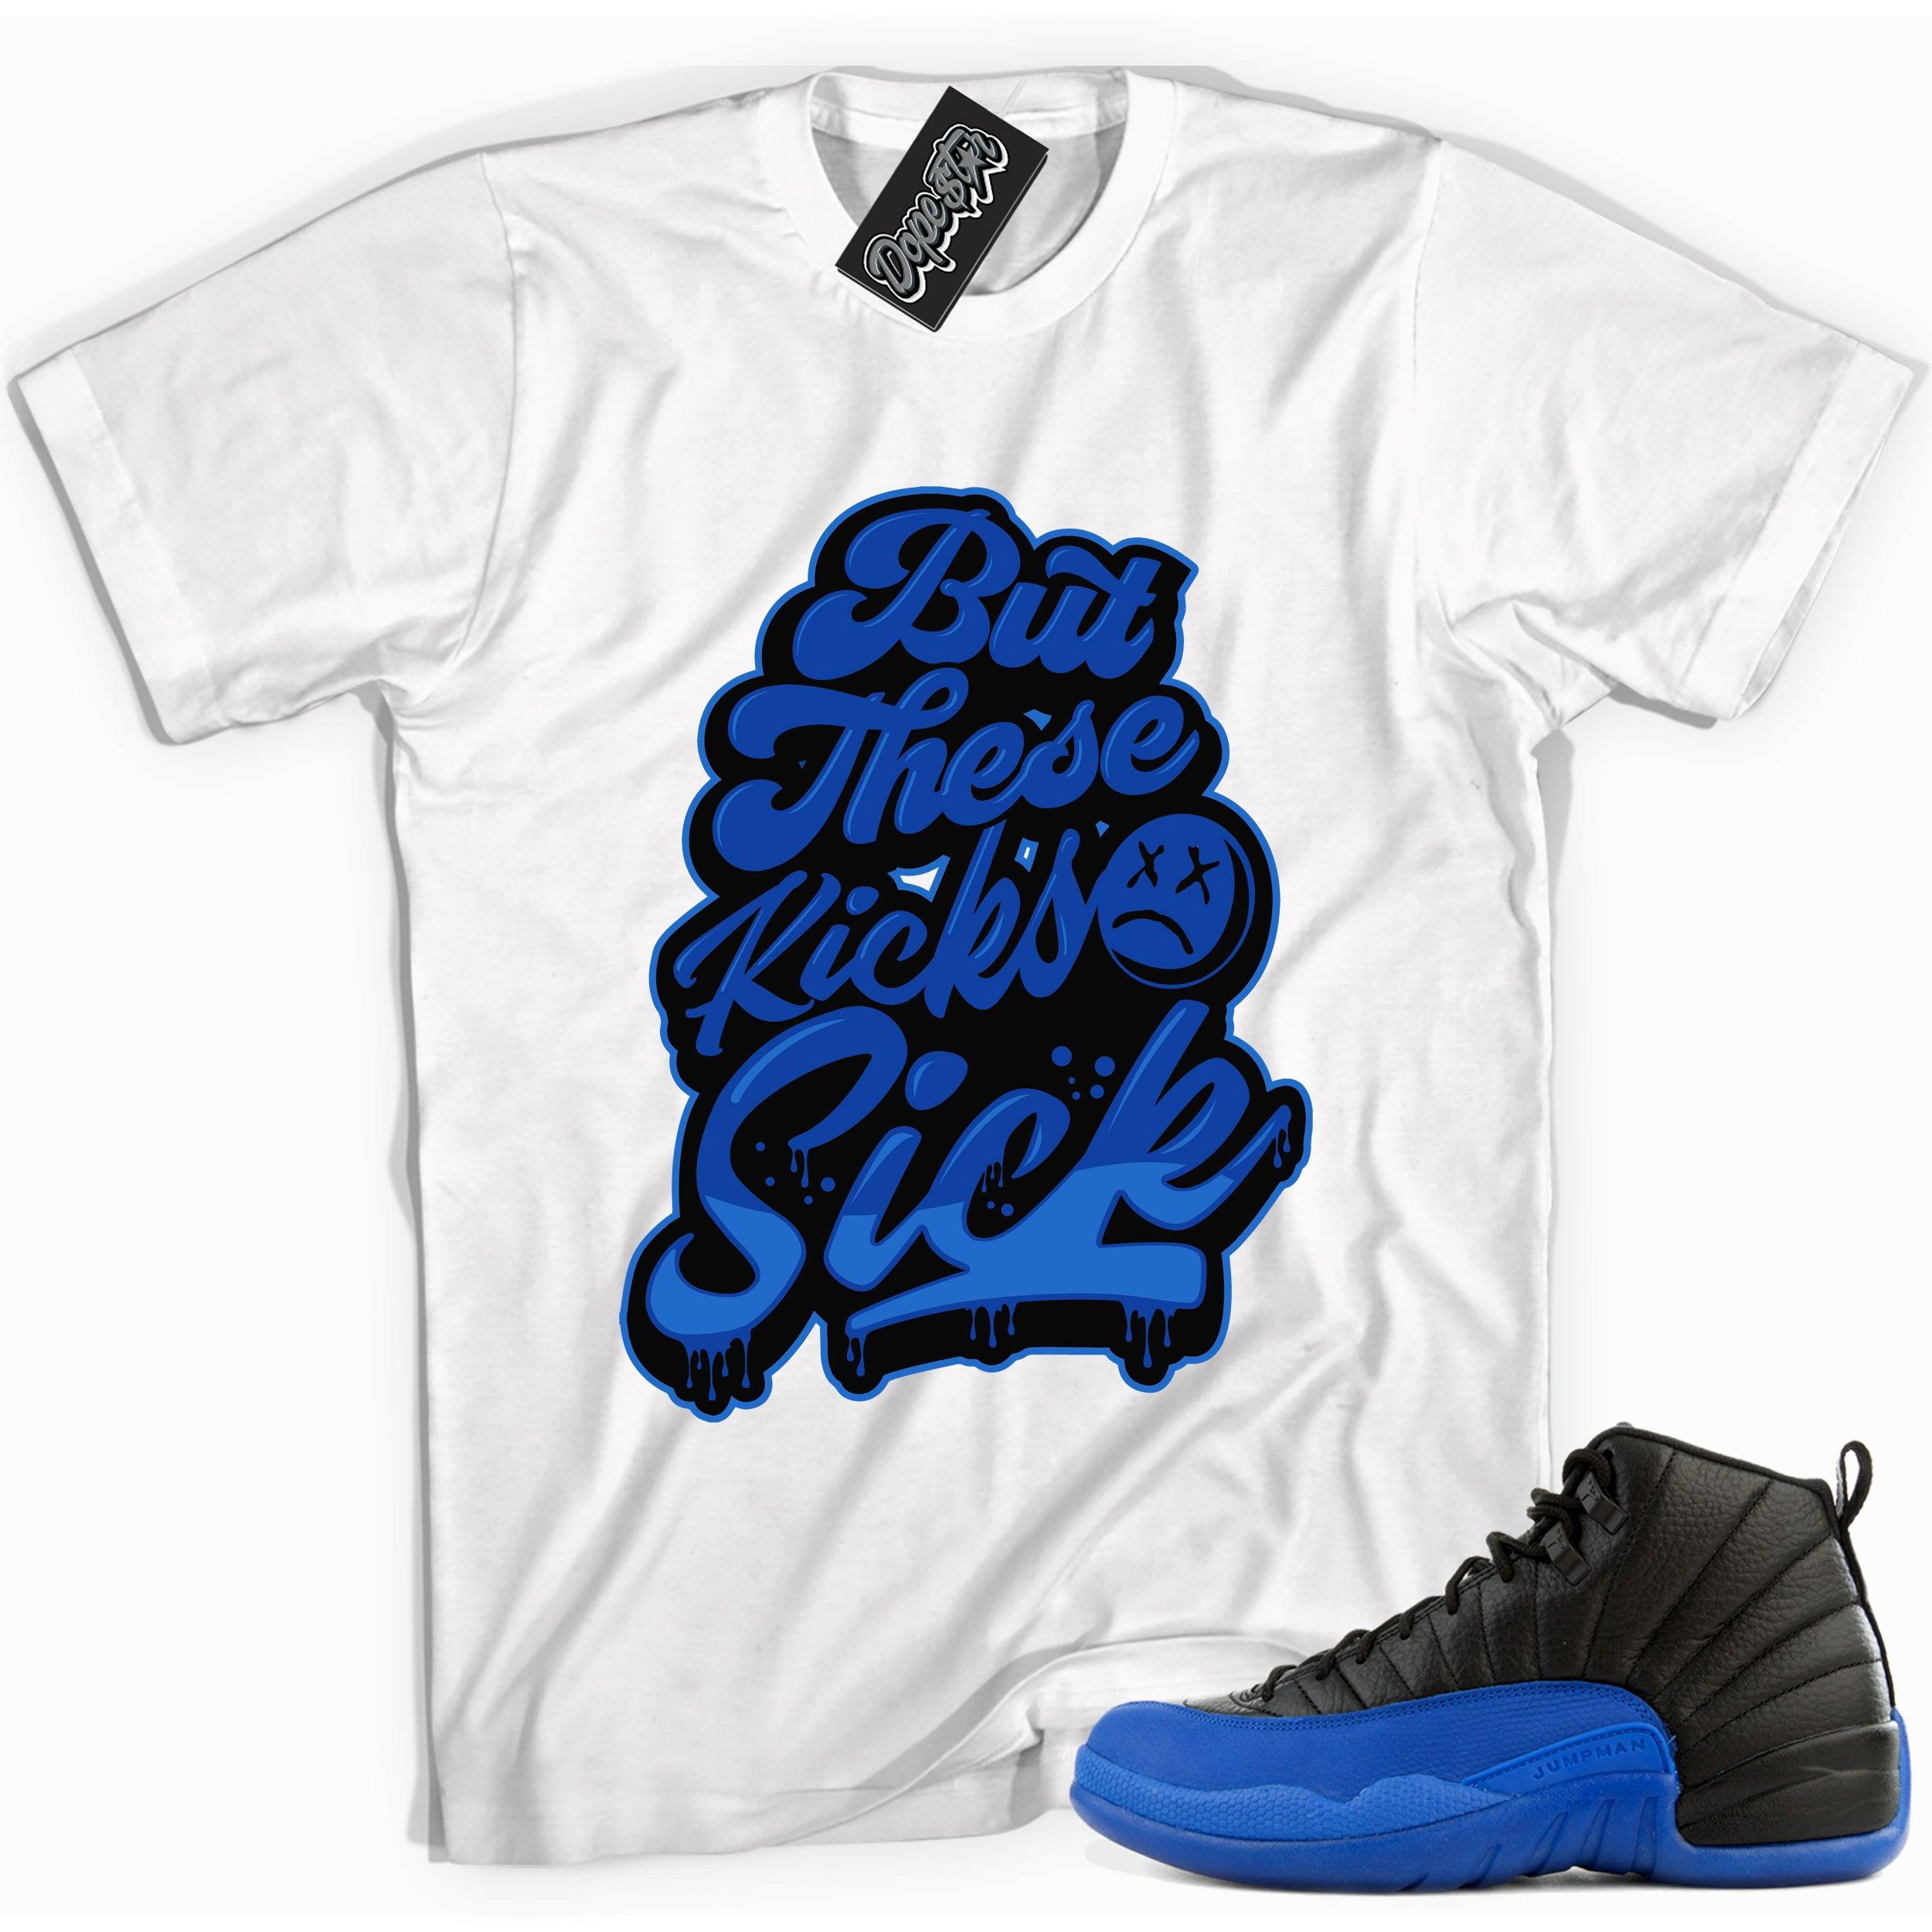 Cool white graphic tee with 'sick kicks' print, that perfectly matches Air Jordan 12 Retro Black Game Royal sneakers.